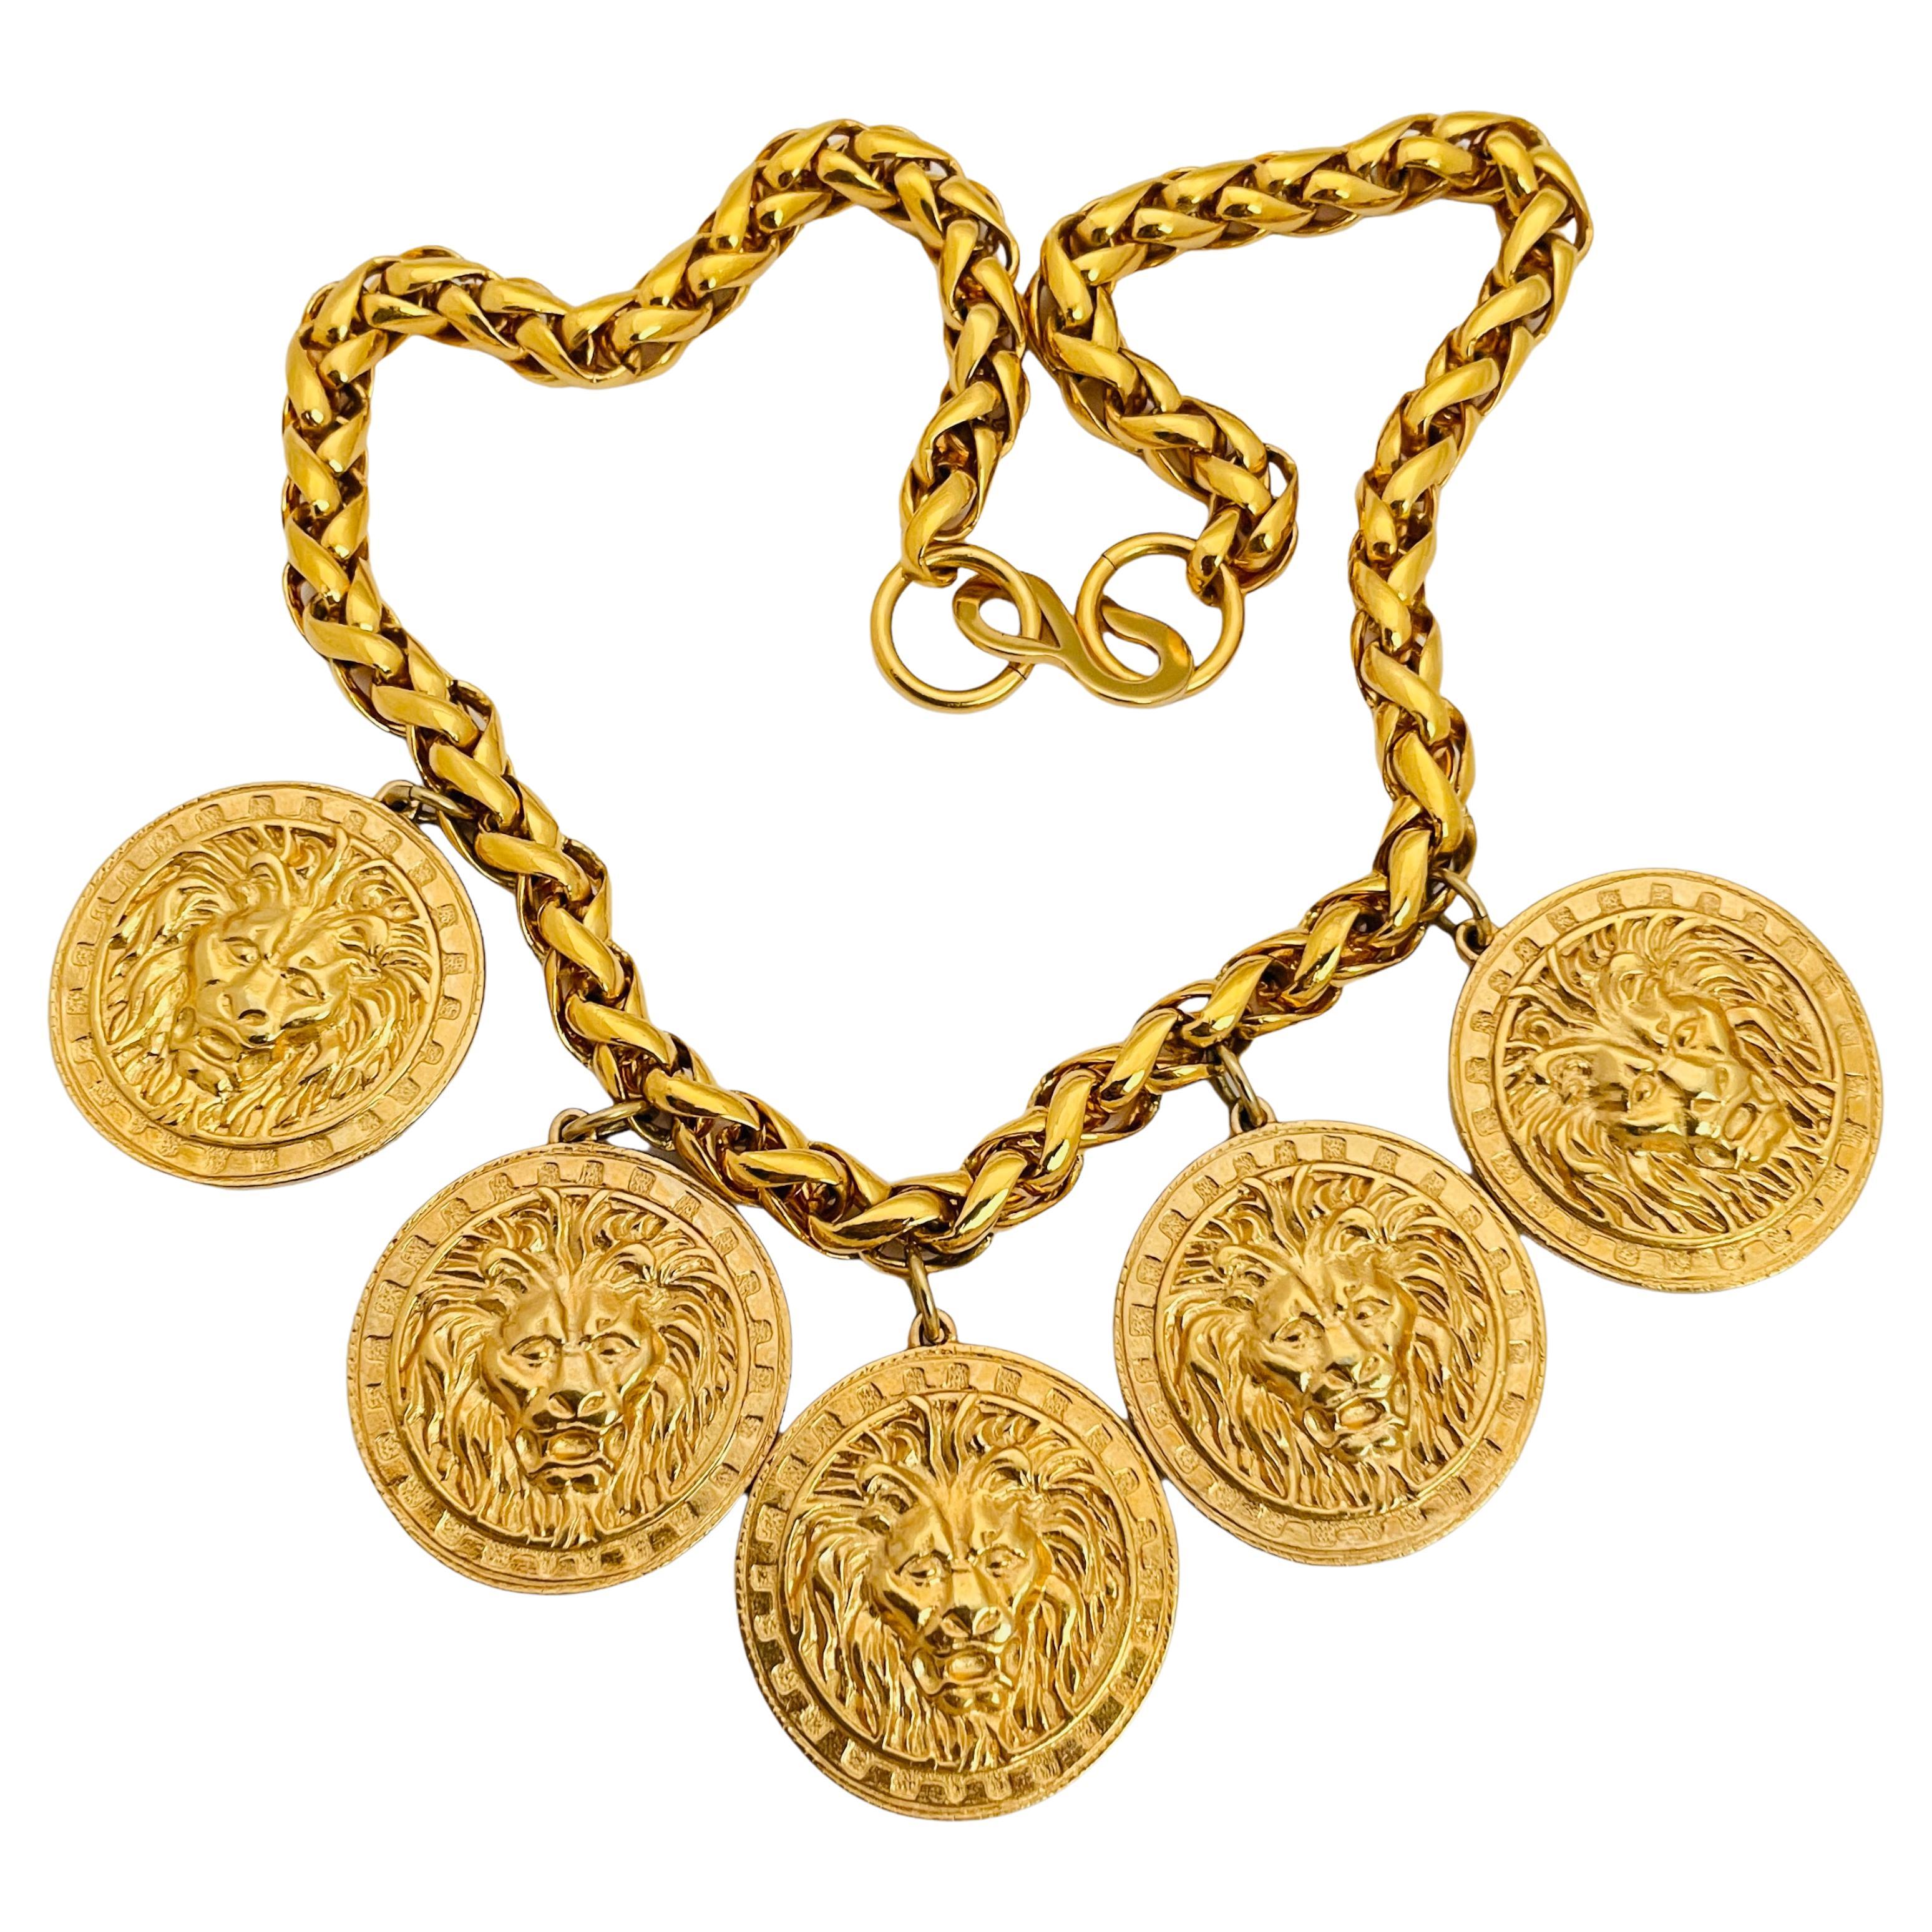 Vintage gold chain coin lions charm designer runway necklace For Sale